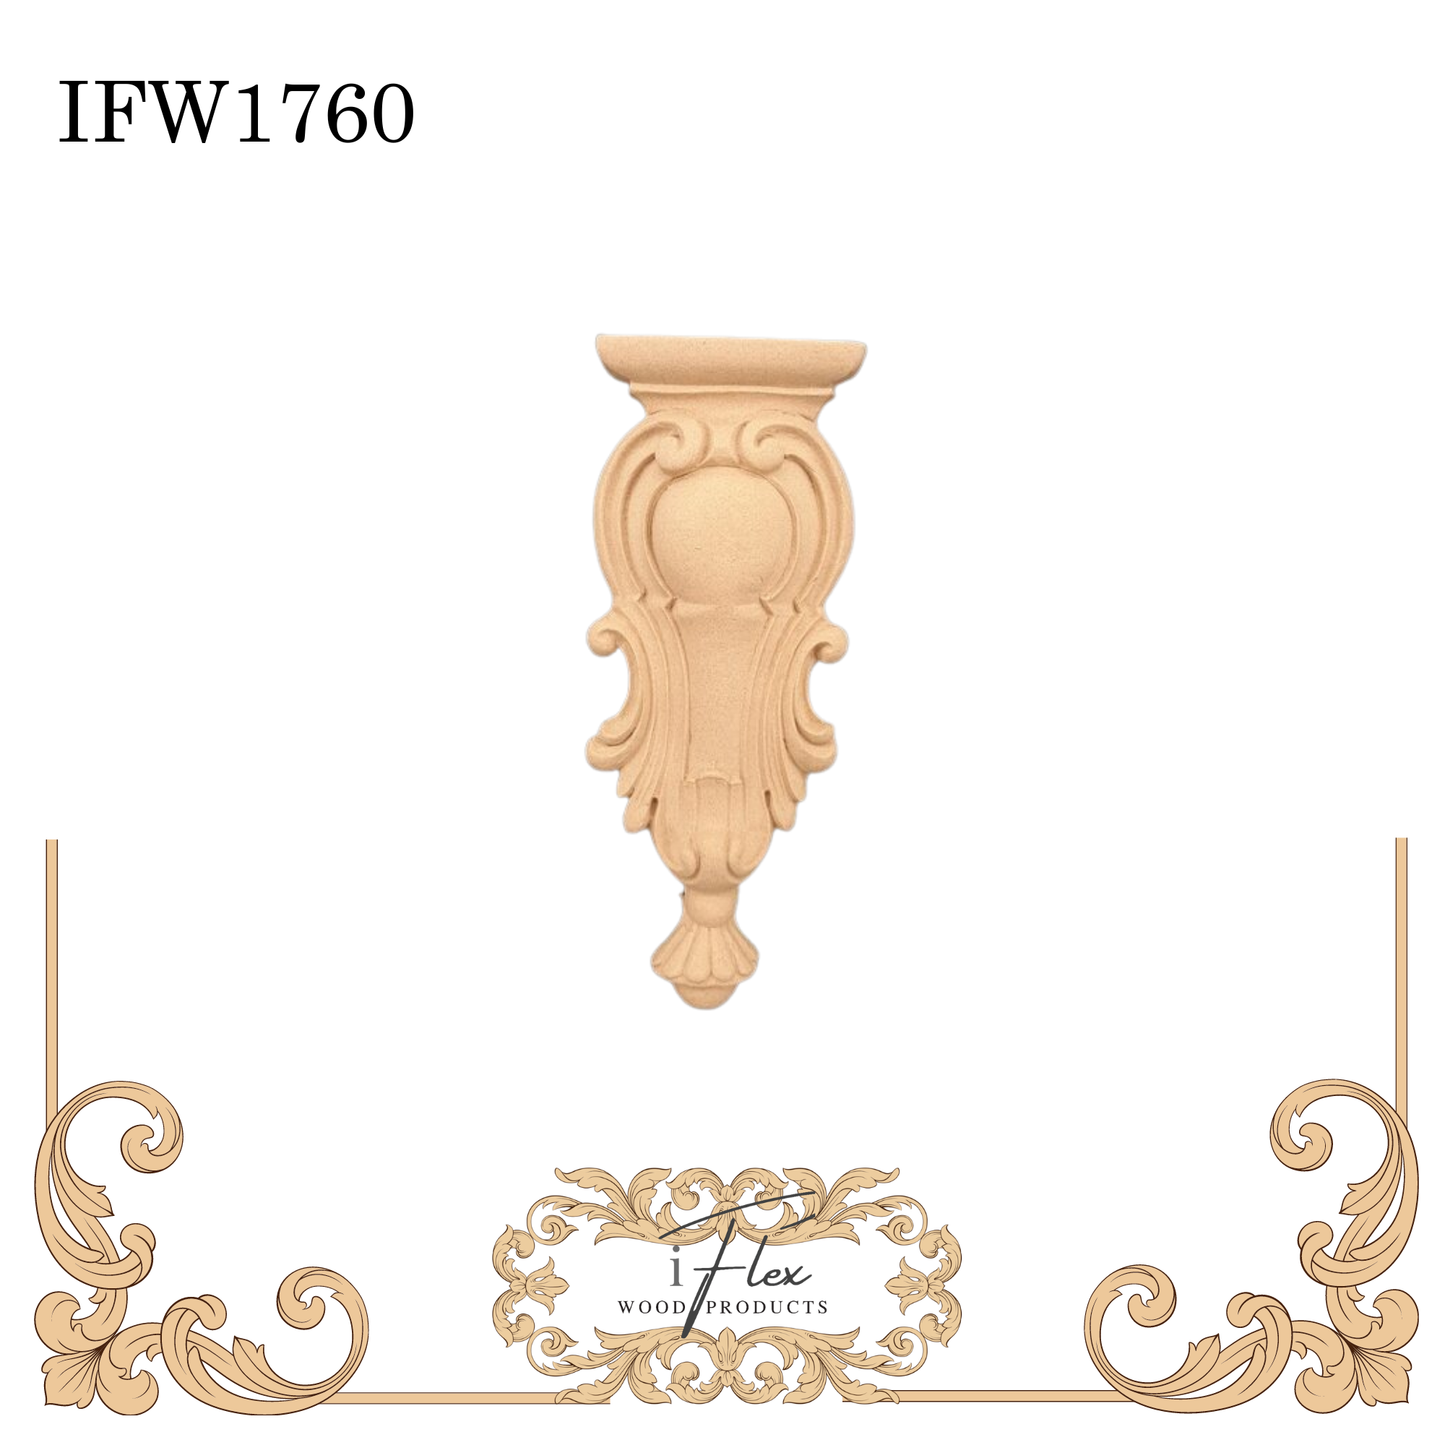 IFW 1760 iFlex Wood Products, bendable mouldings, flexible, wooden appliques, corbel